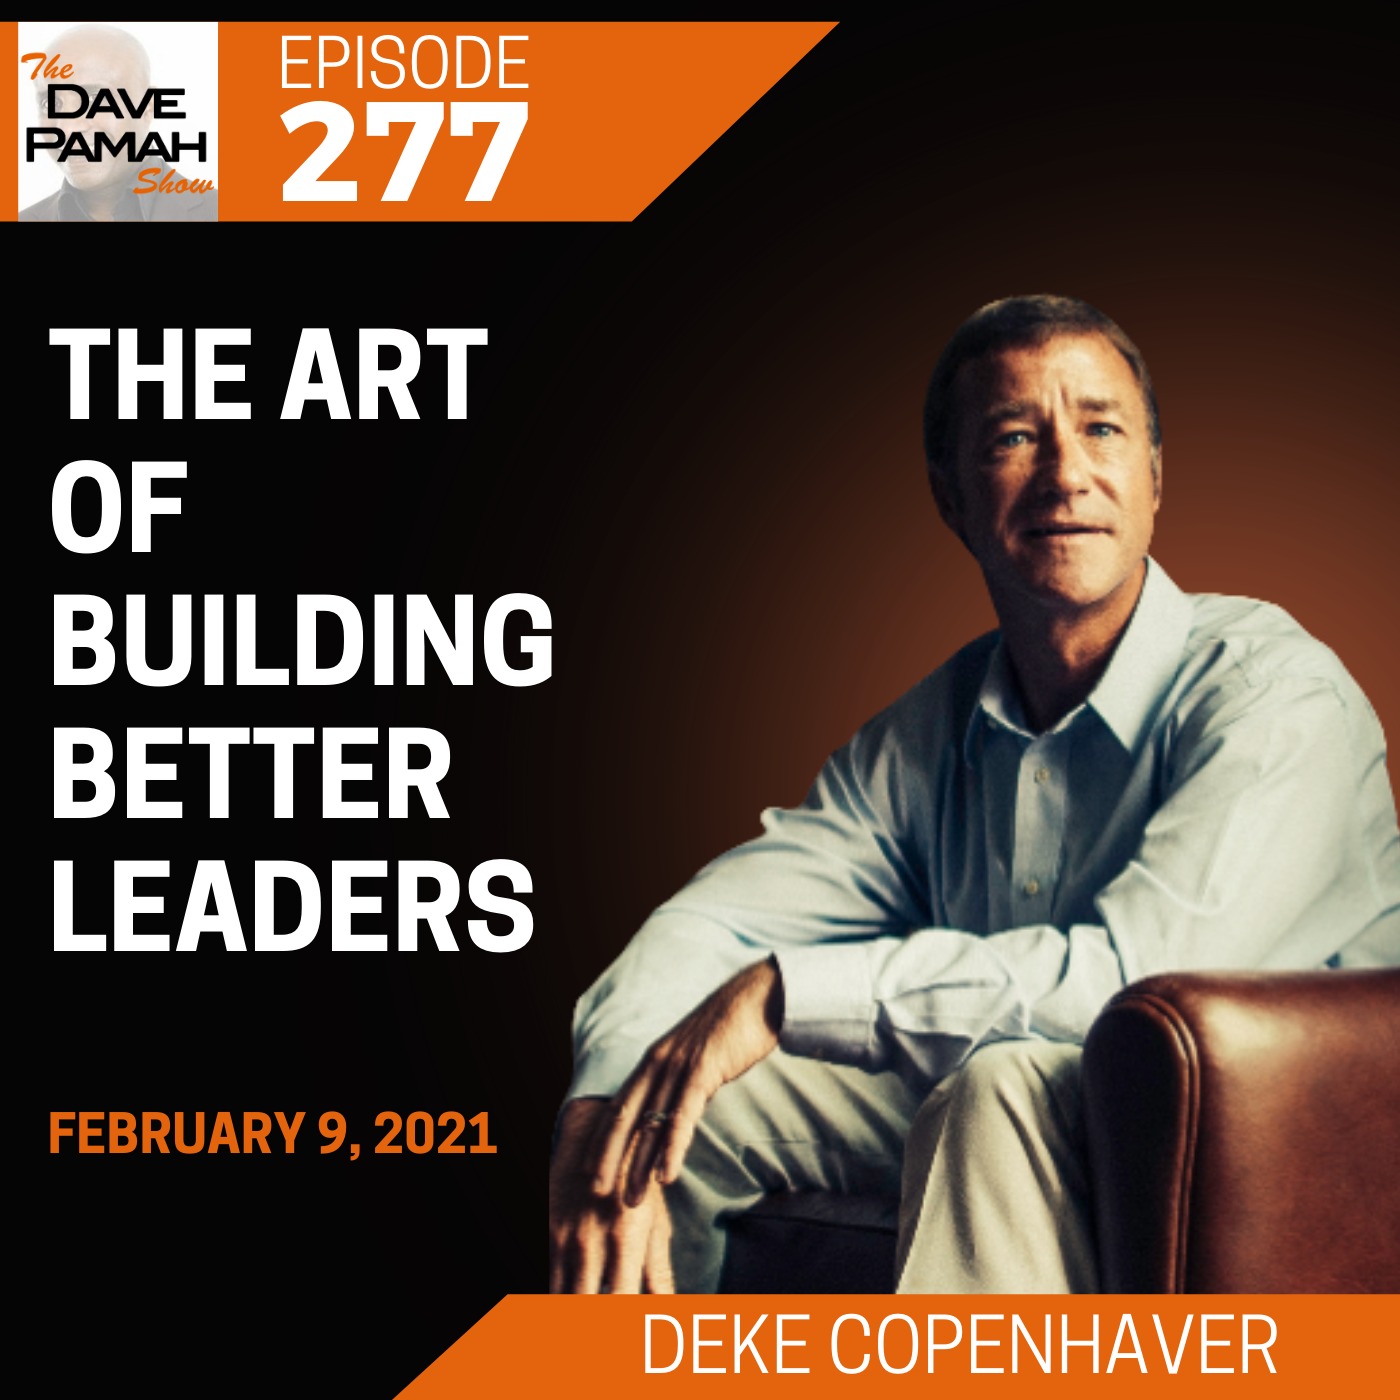 The Art of Building Better Leaders with Deke Copenhaver Image